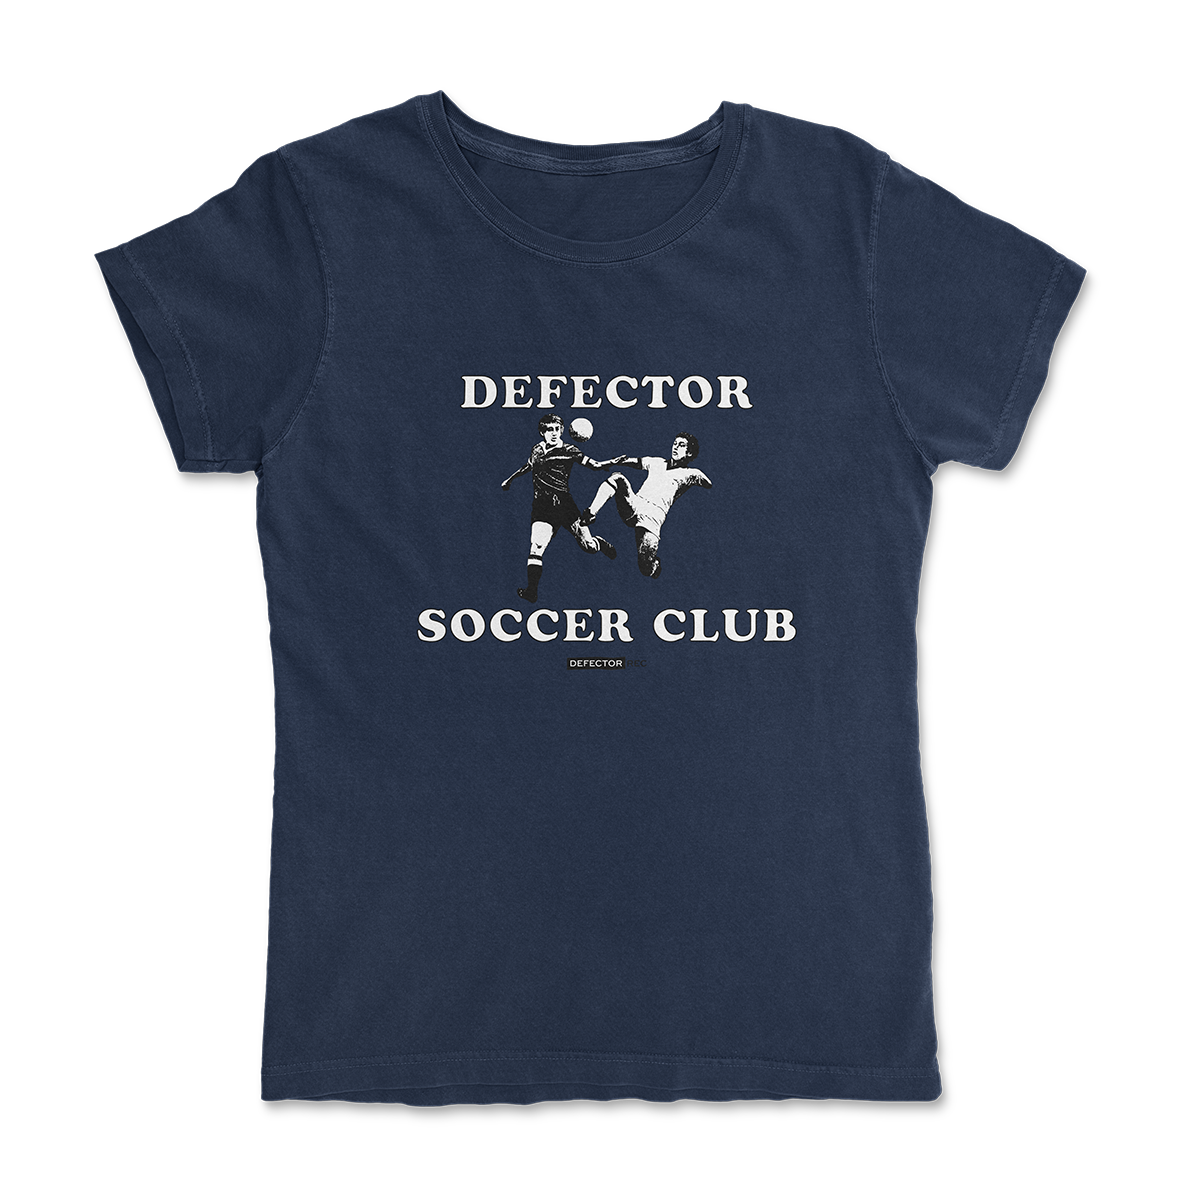 Defector shirt that says “DEFECTOR SOCCER CLUB.” Features clip art of soccer players.  Blue shirt in ‘femme’ cut.